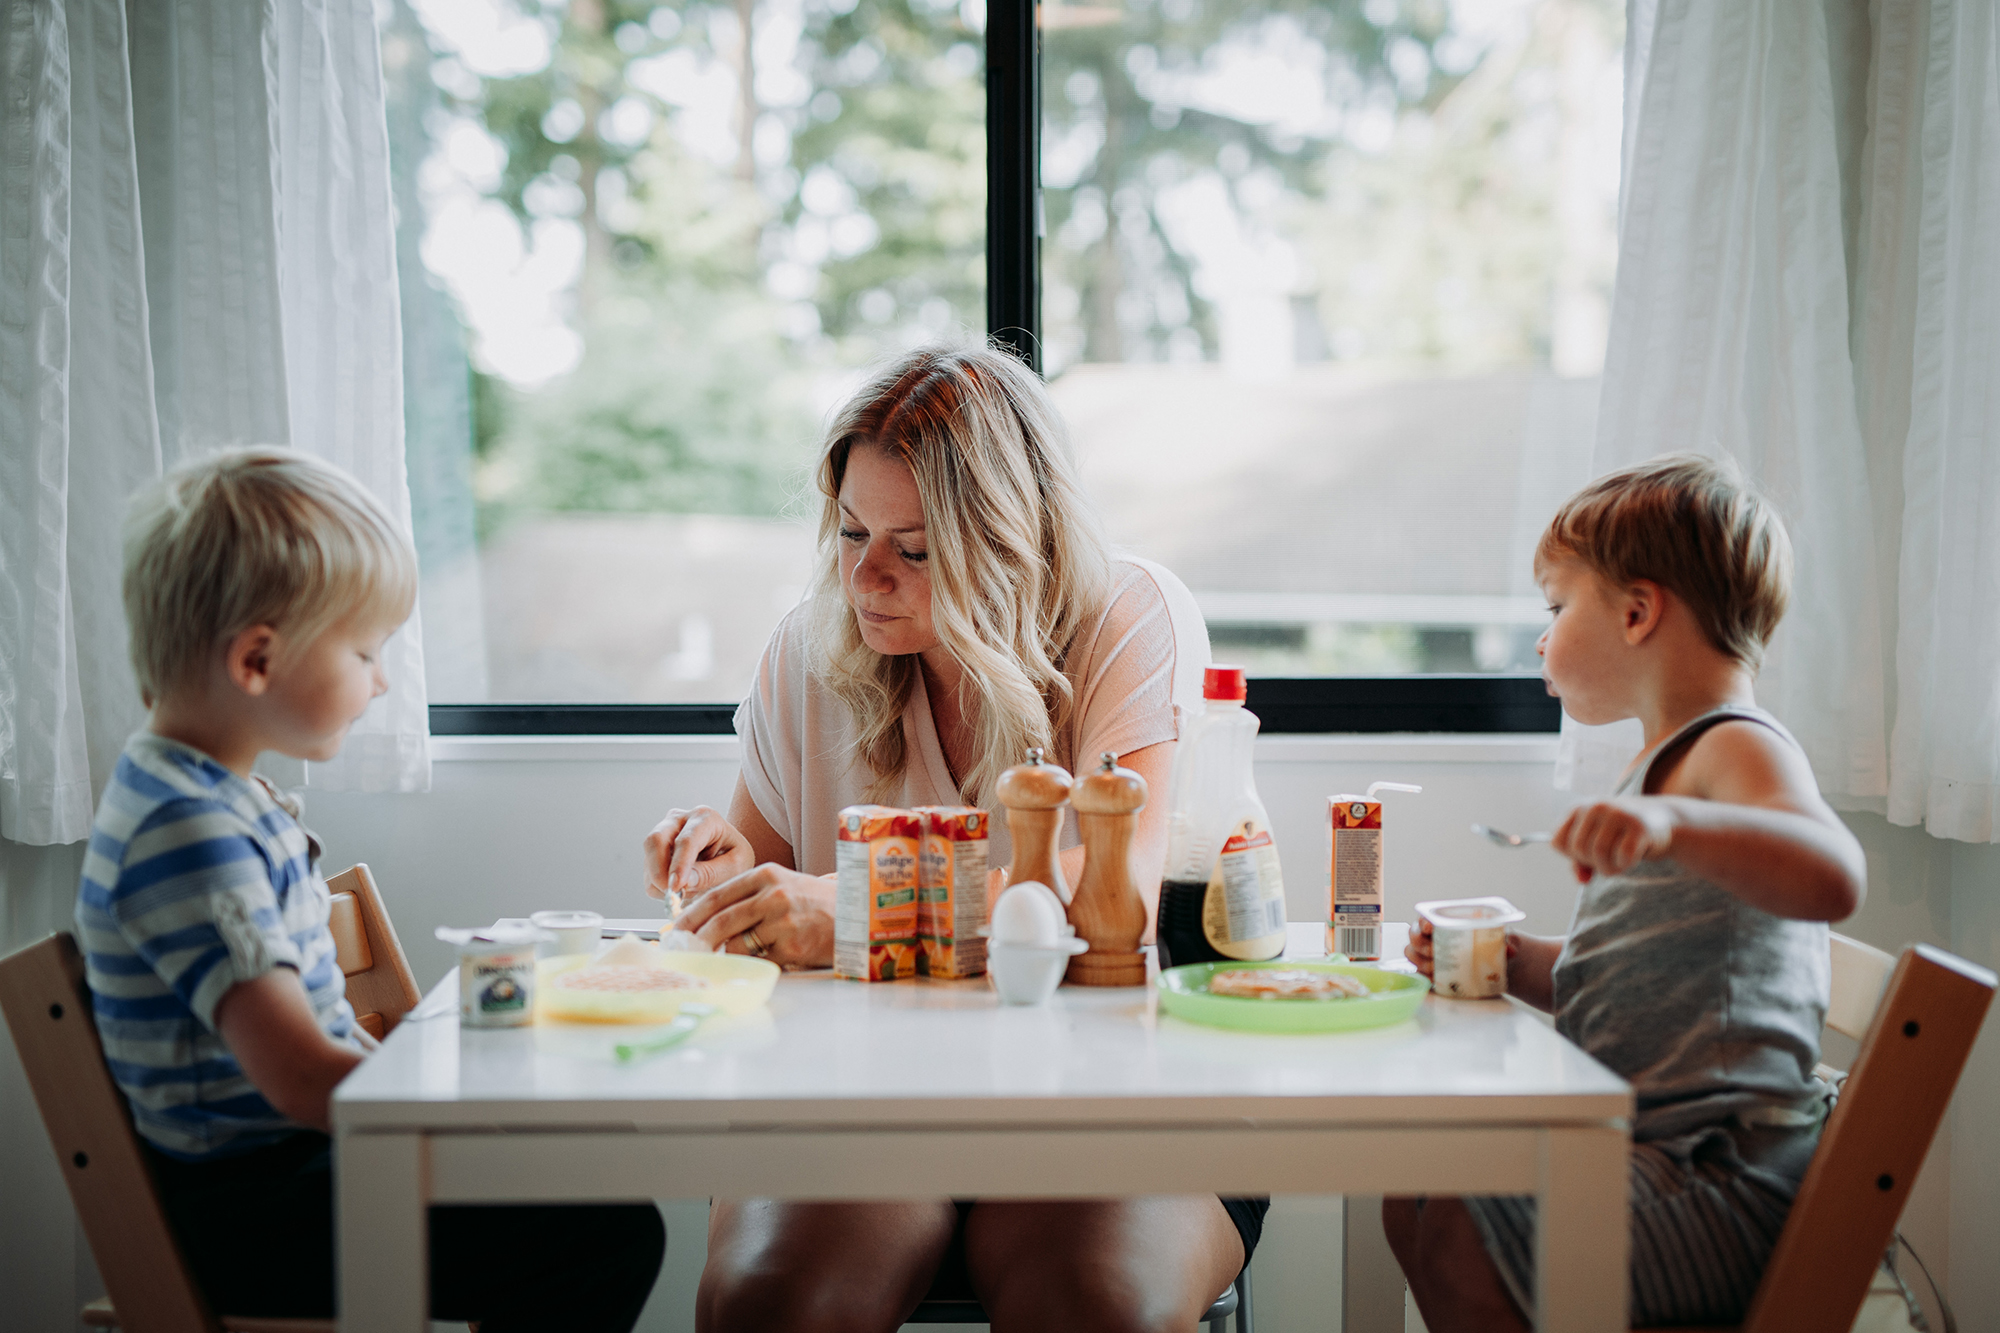 a mother sits a small kitchen table with her two young sons. she is cutting up a piece of fruit while her little boys look on with wonder and curiousity.